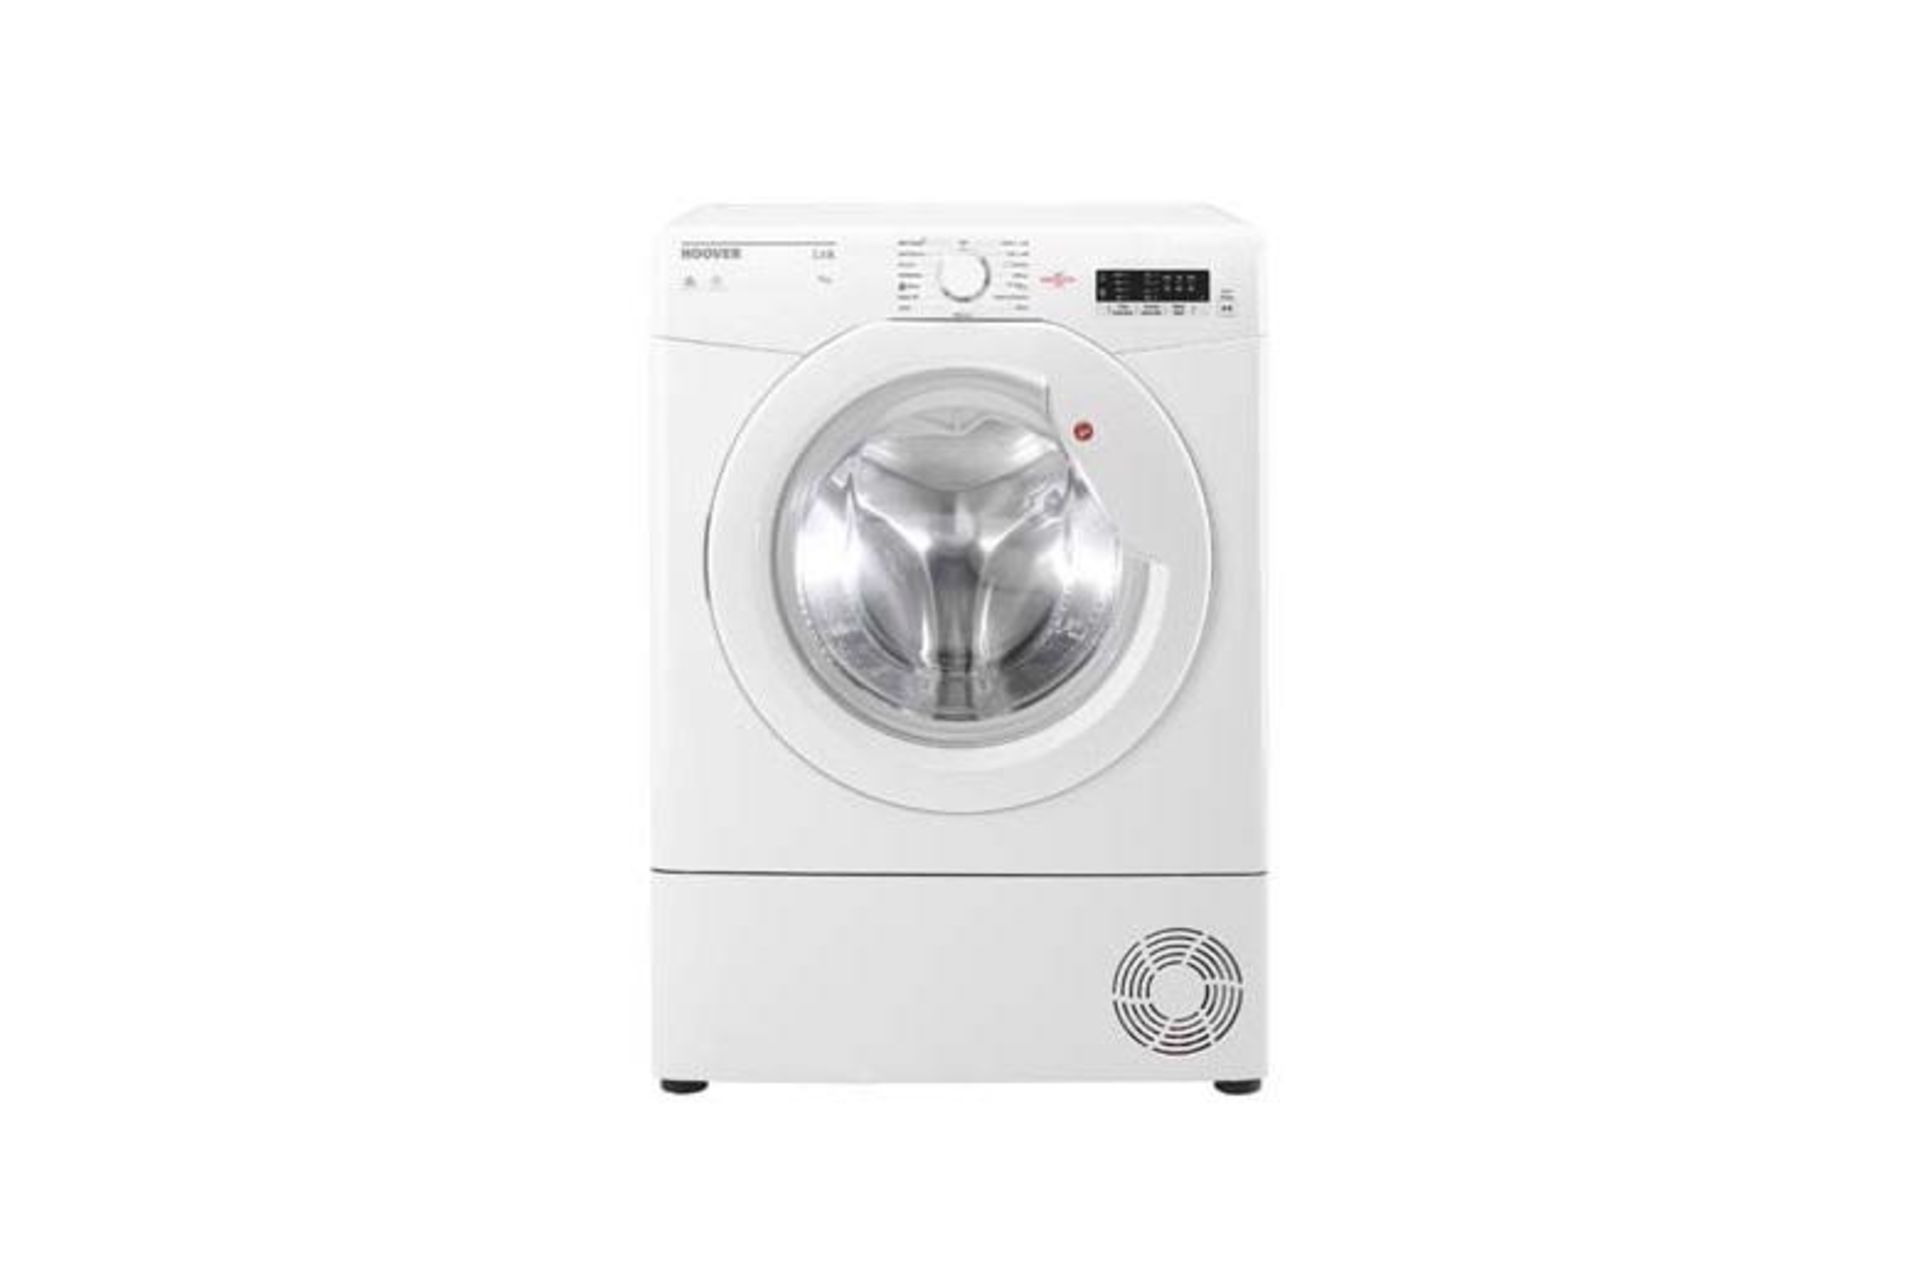 Mixed Lot of Eight Refurbished Appliances Including Hoover Washer Dryer with WIFI in White, - Image 5 of 6